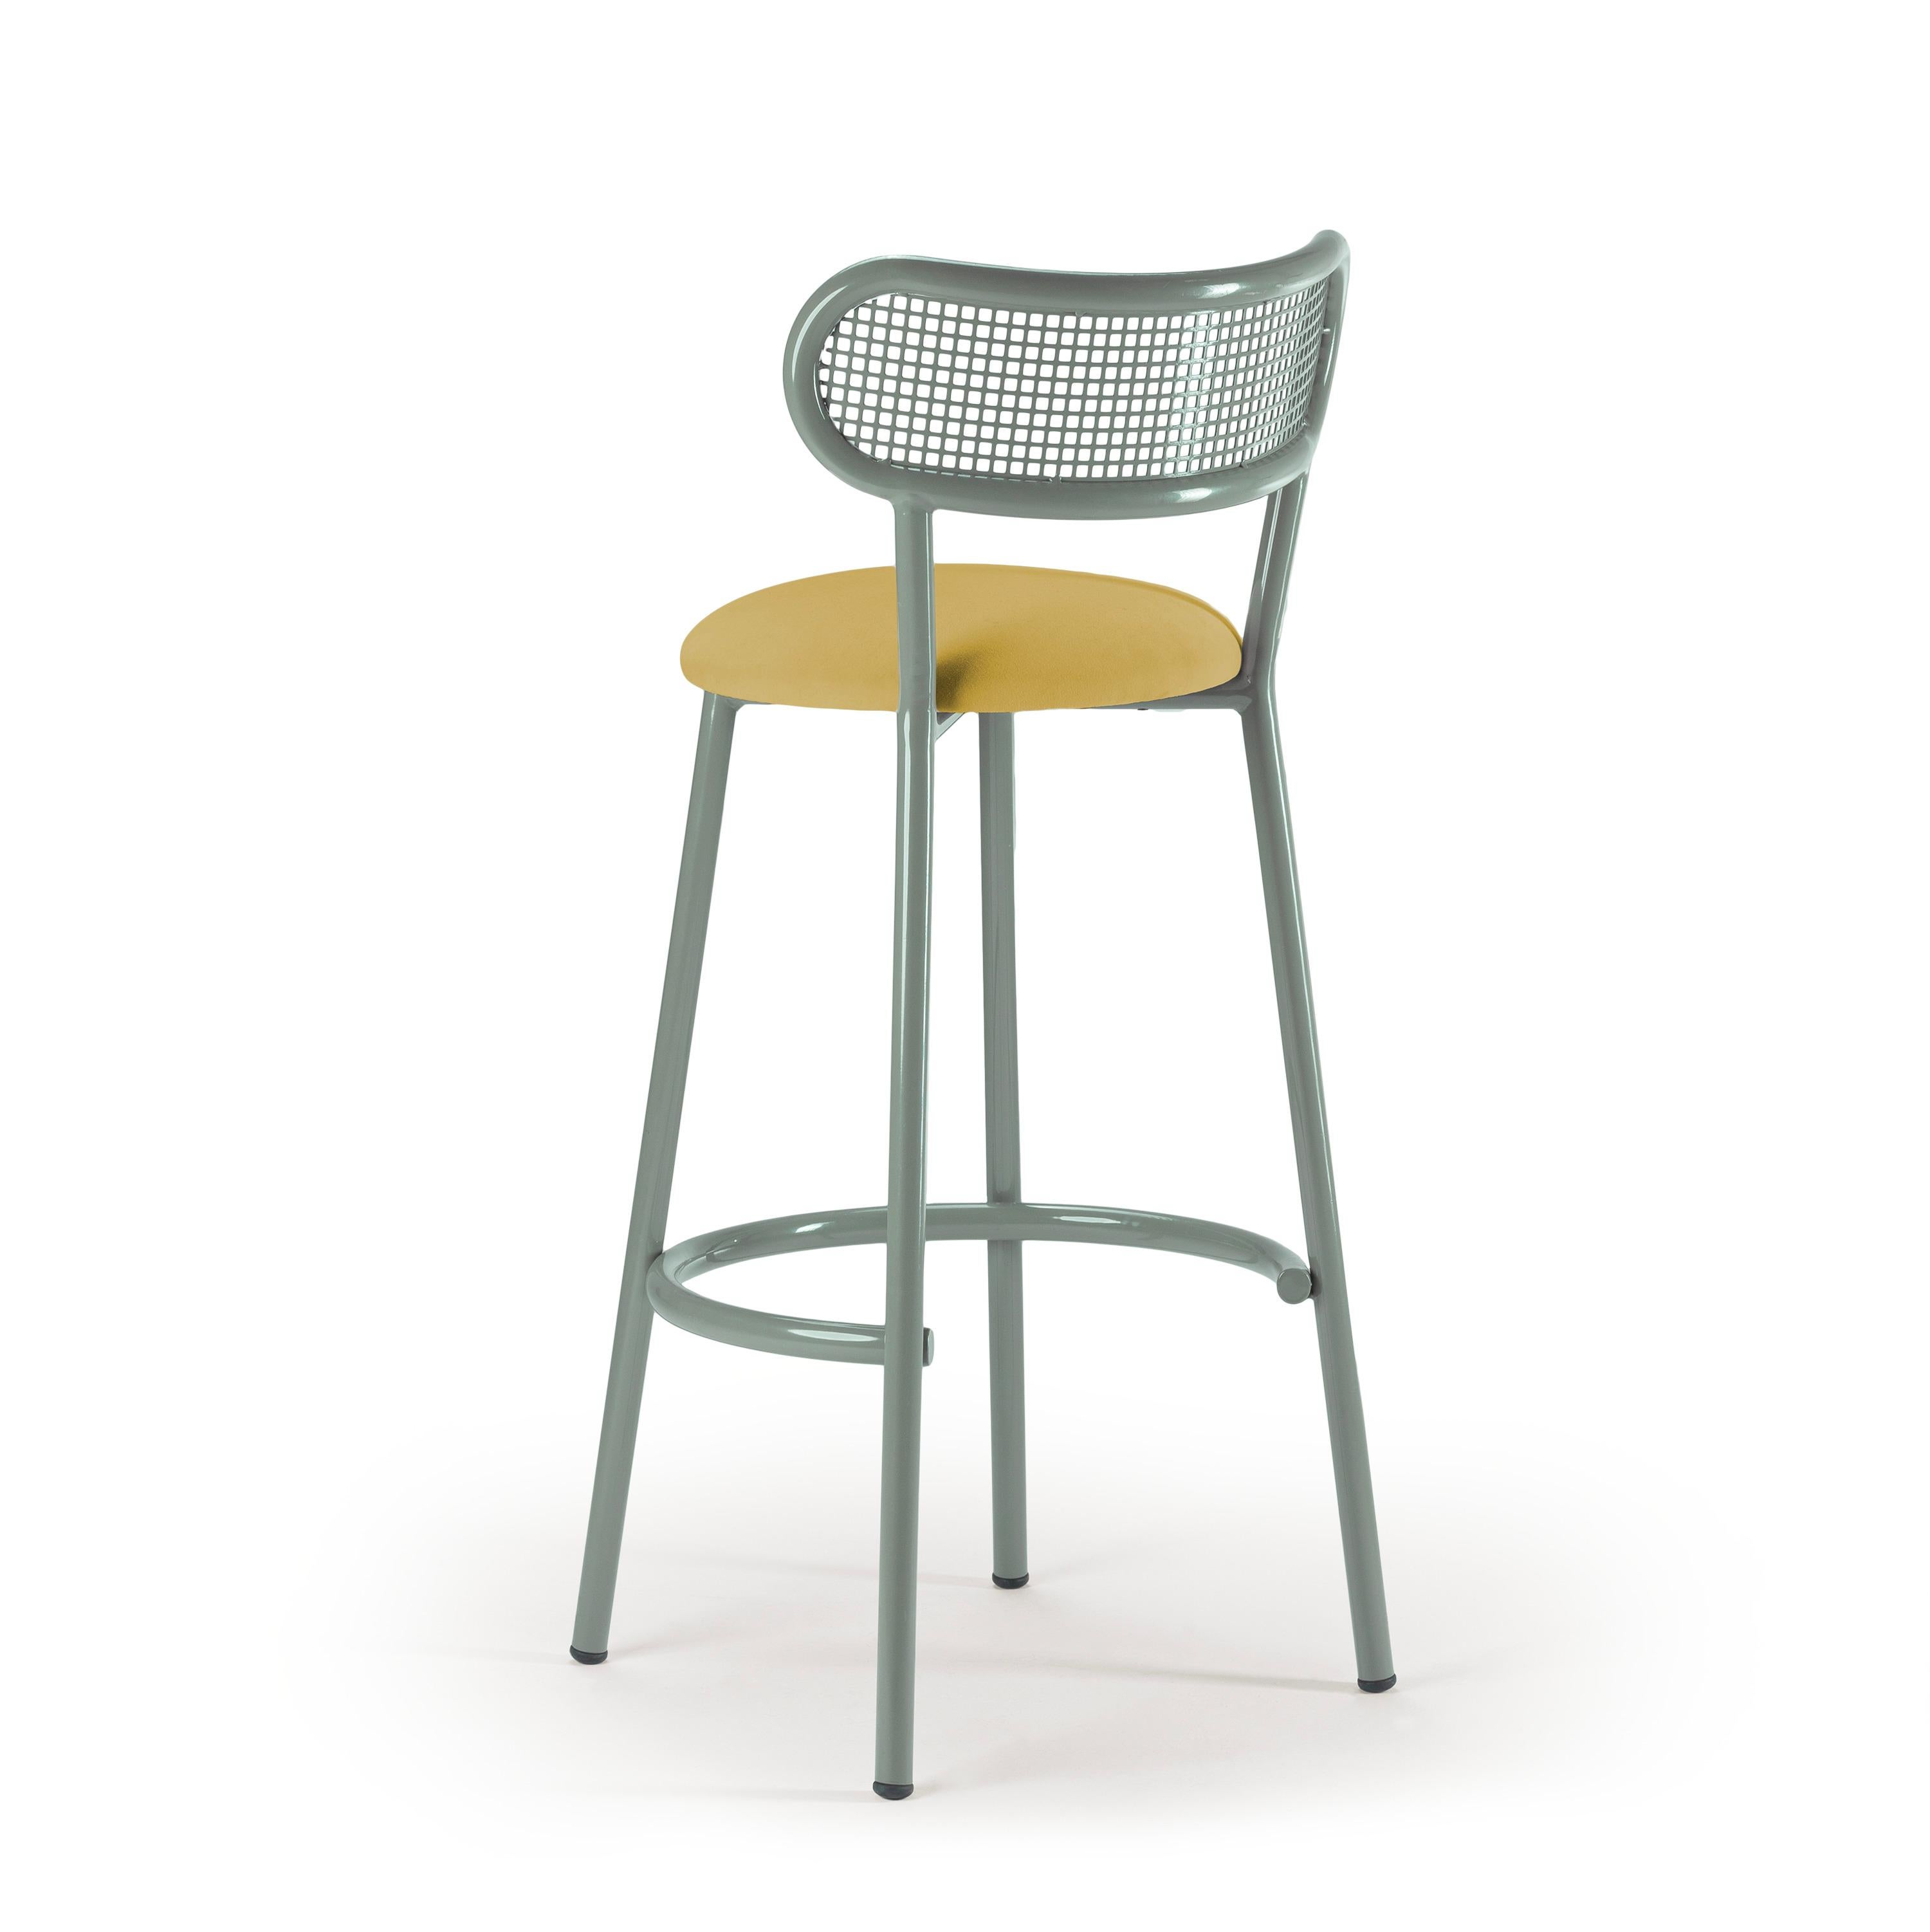 Mid-Century Modern Louise Bar Chair with Sage Steel Structure, Perforated Steel Back and Upholstery For Sale